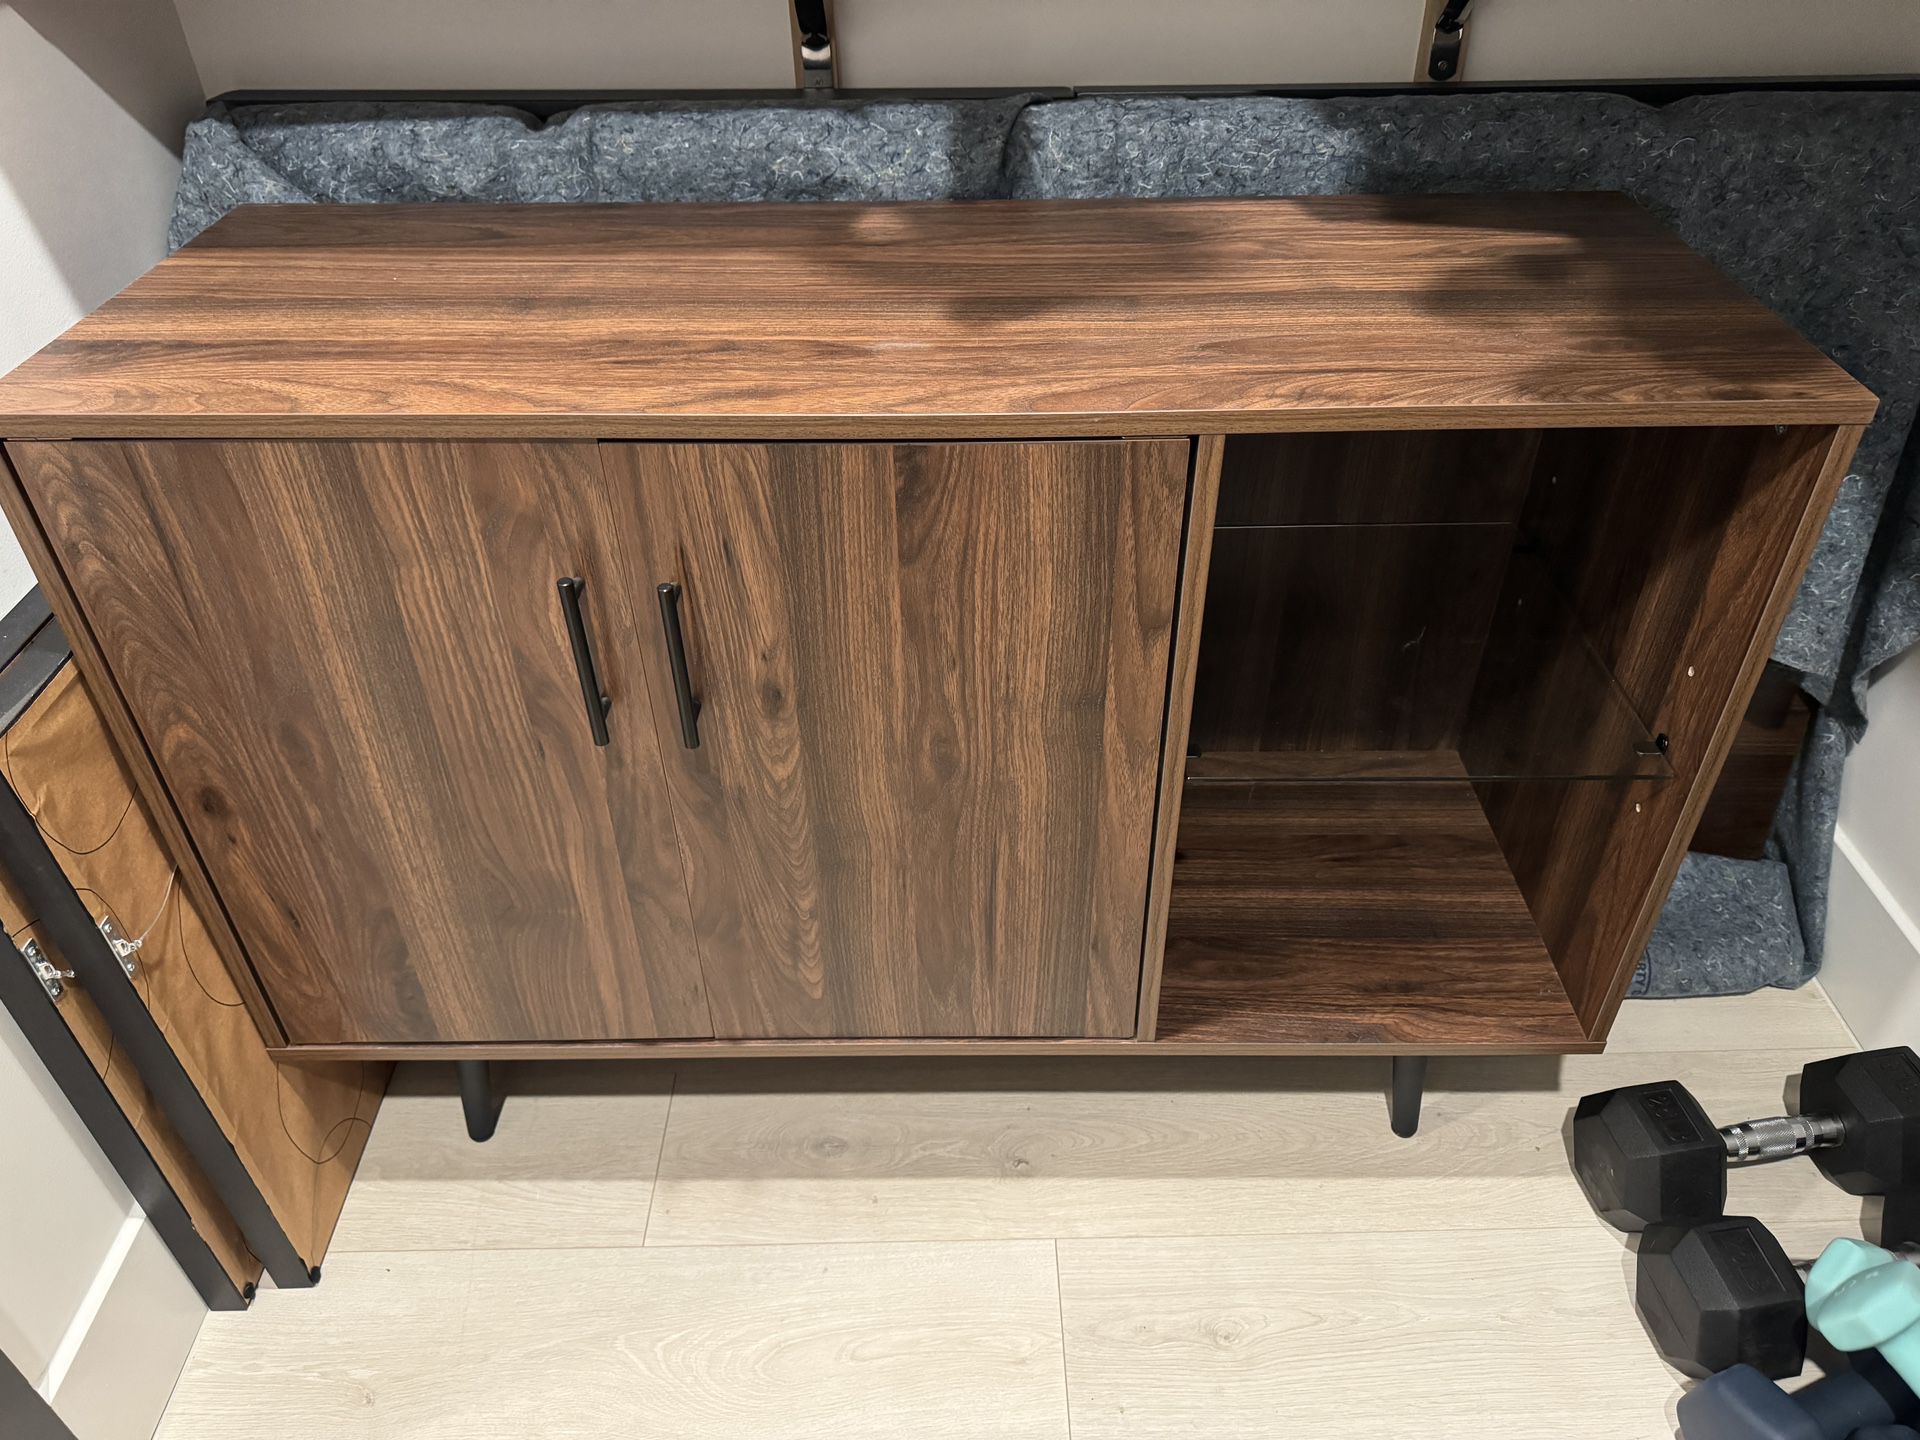 Credenza/Cabinet With Glass Shelf 